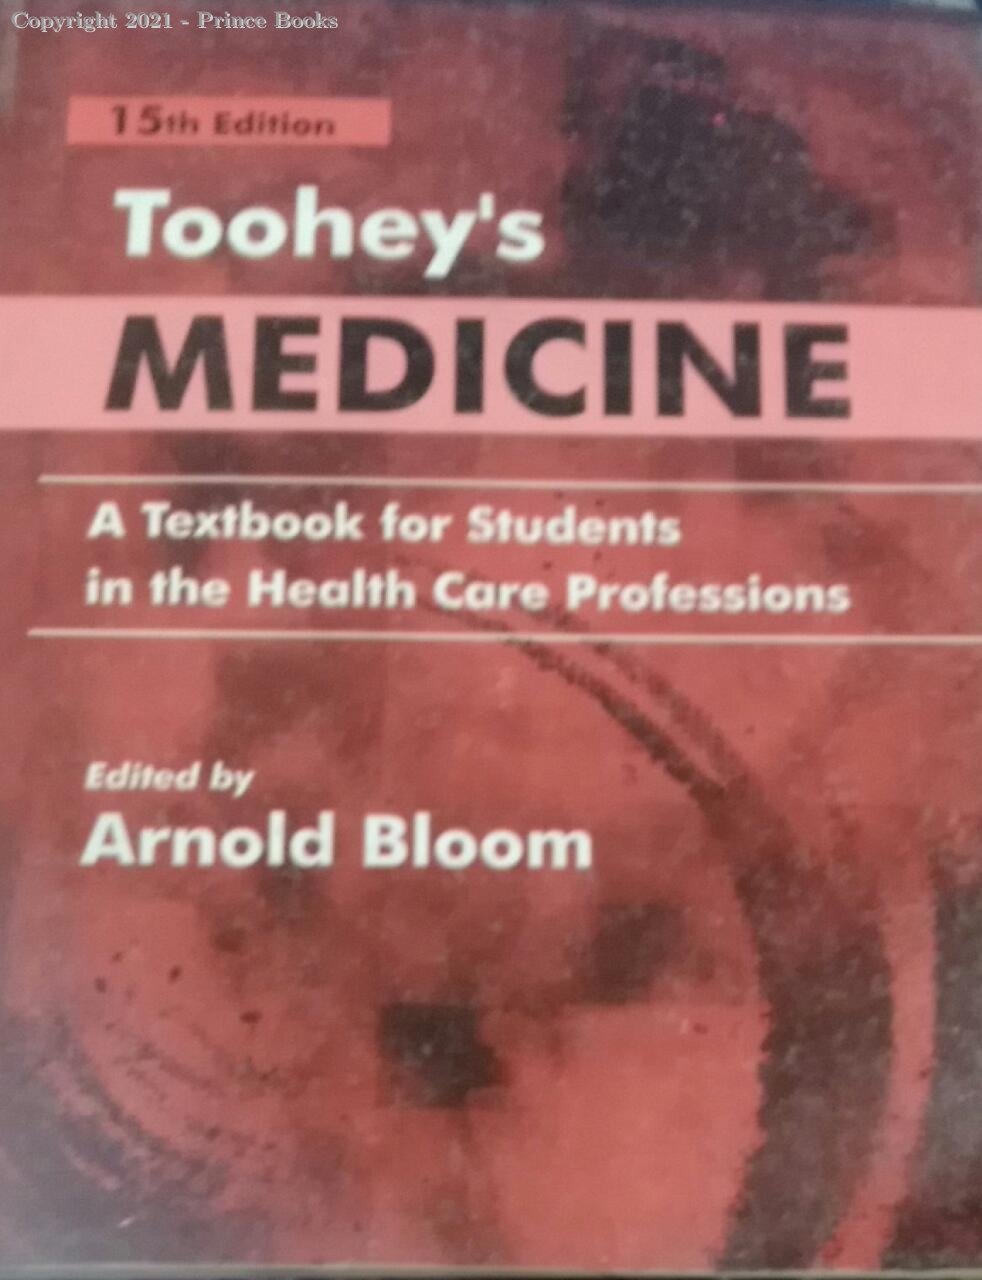 Toohey's Medicine A Textbook for Students in the Health Care Professions